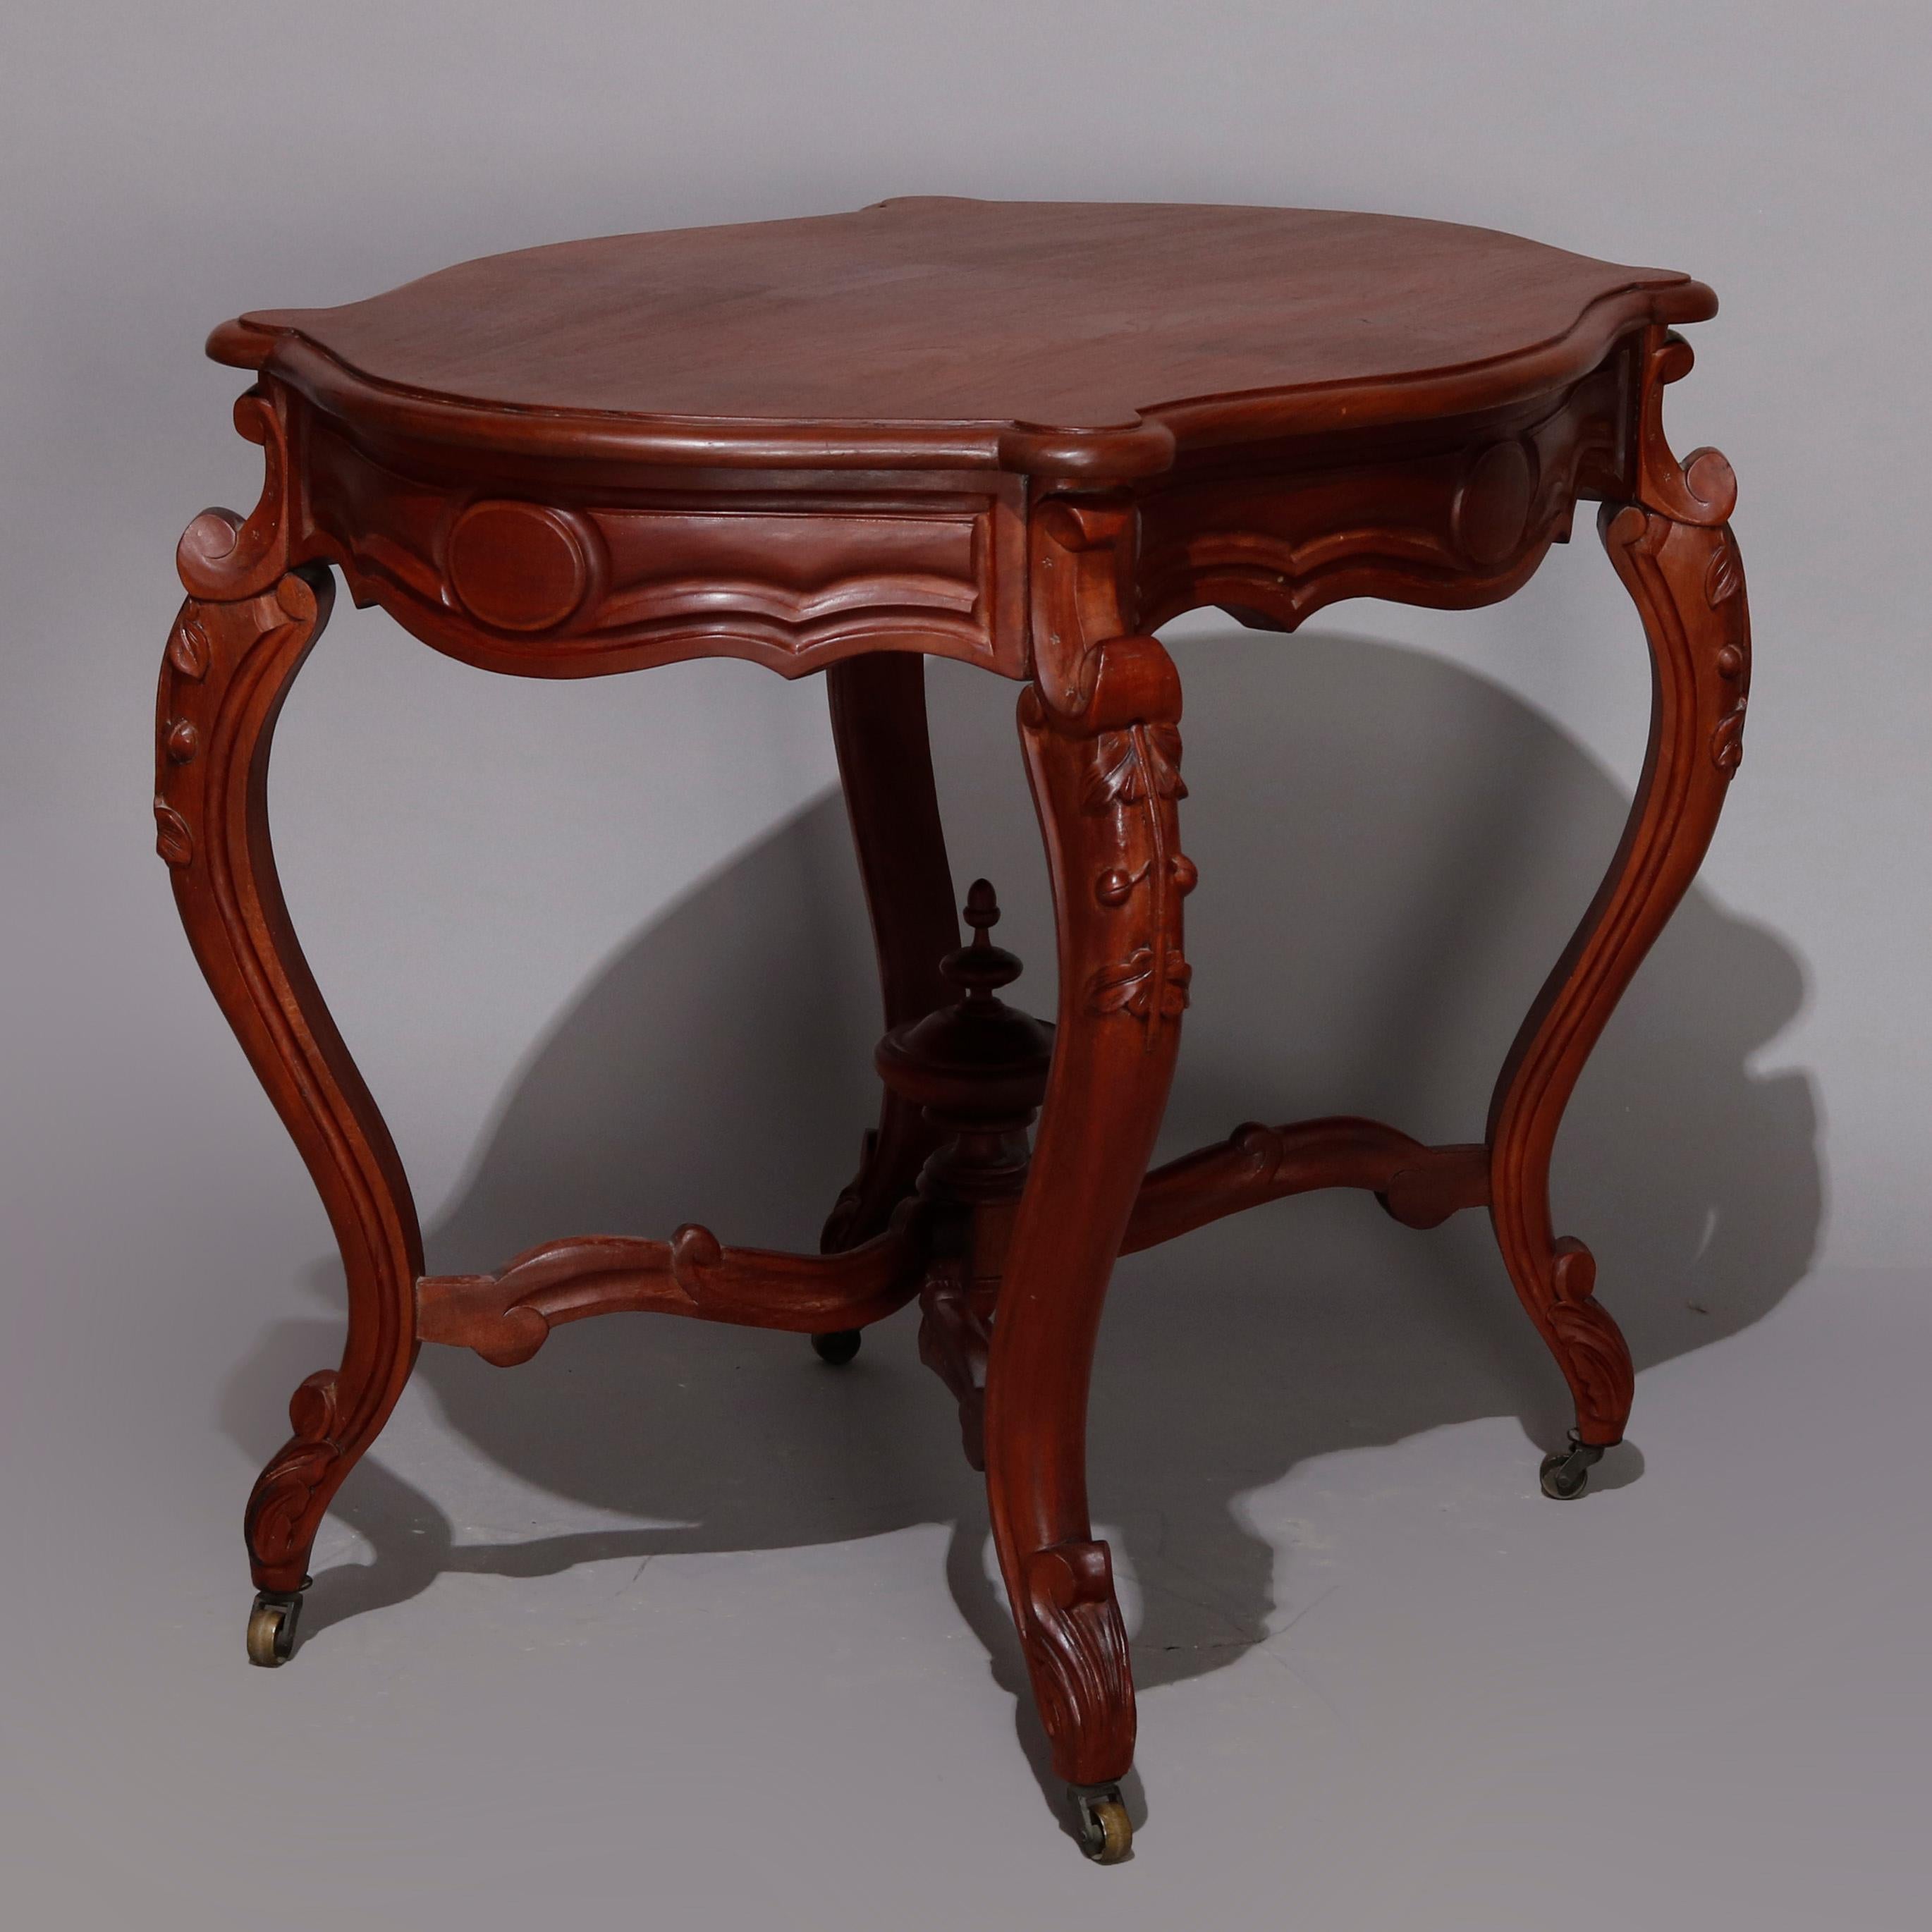 American Antique Victorian Carved Walnut Turtle Top Parlor Table, circa 1890